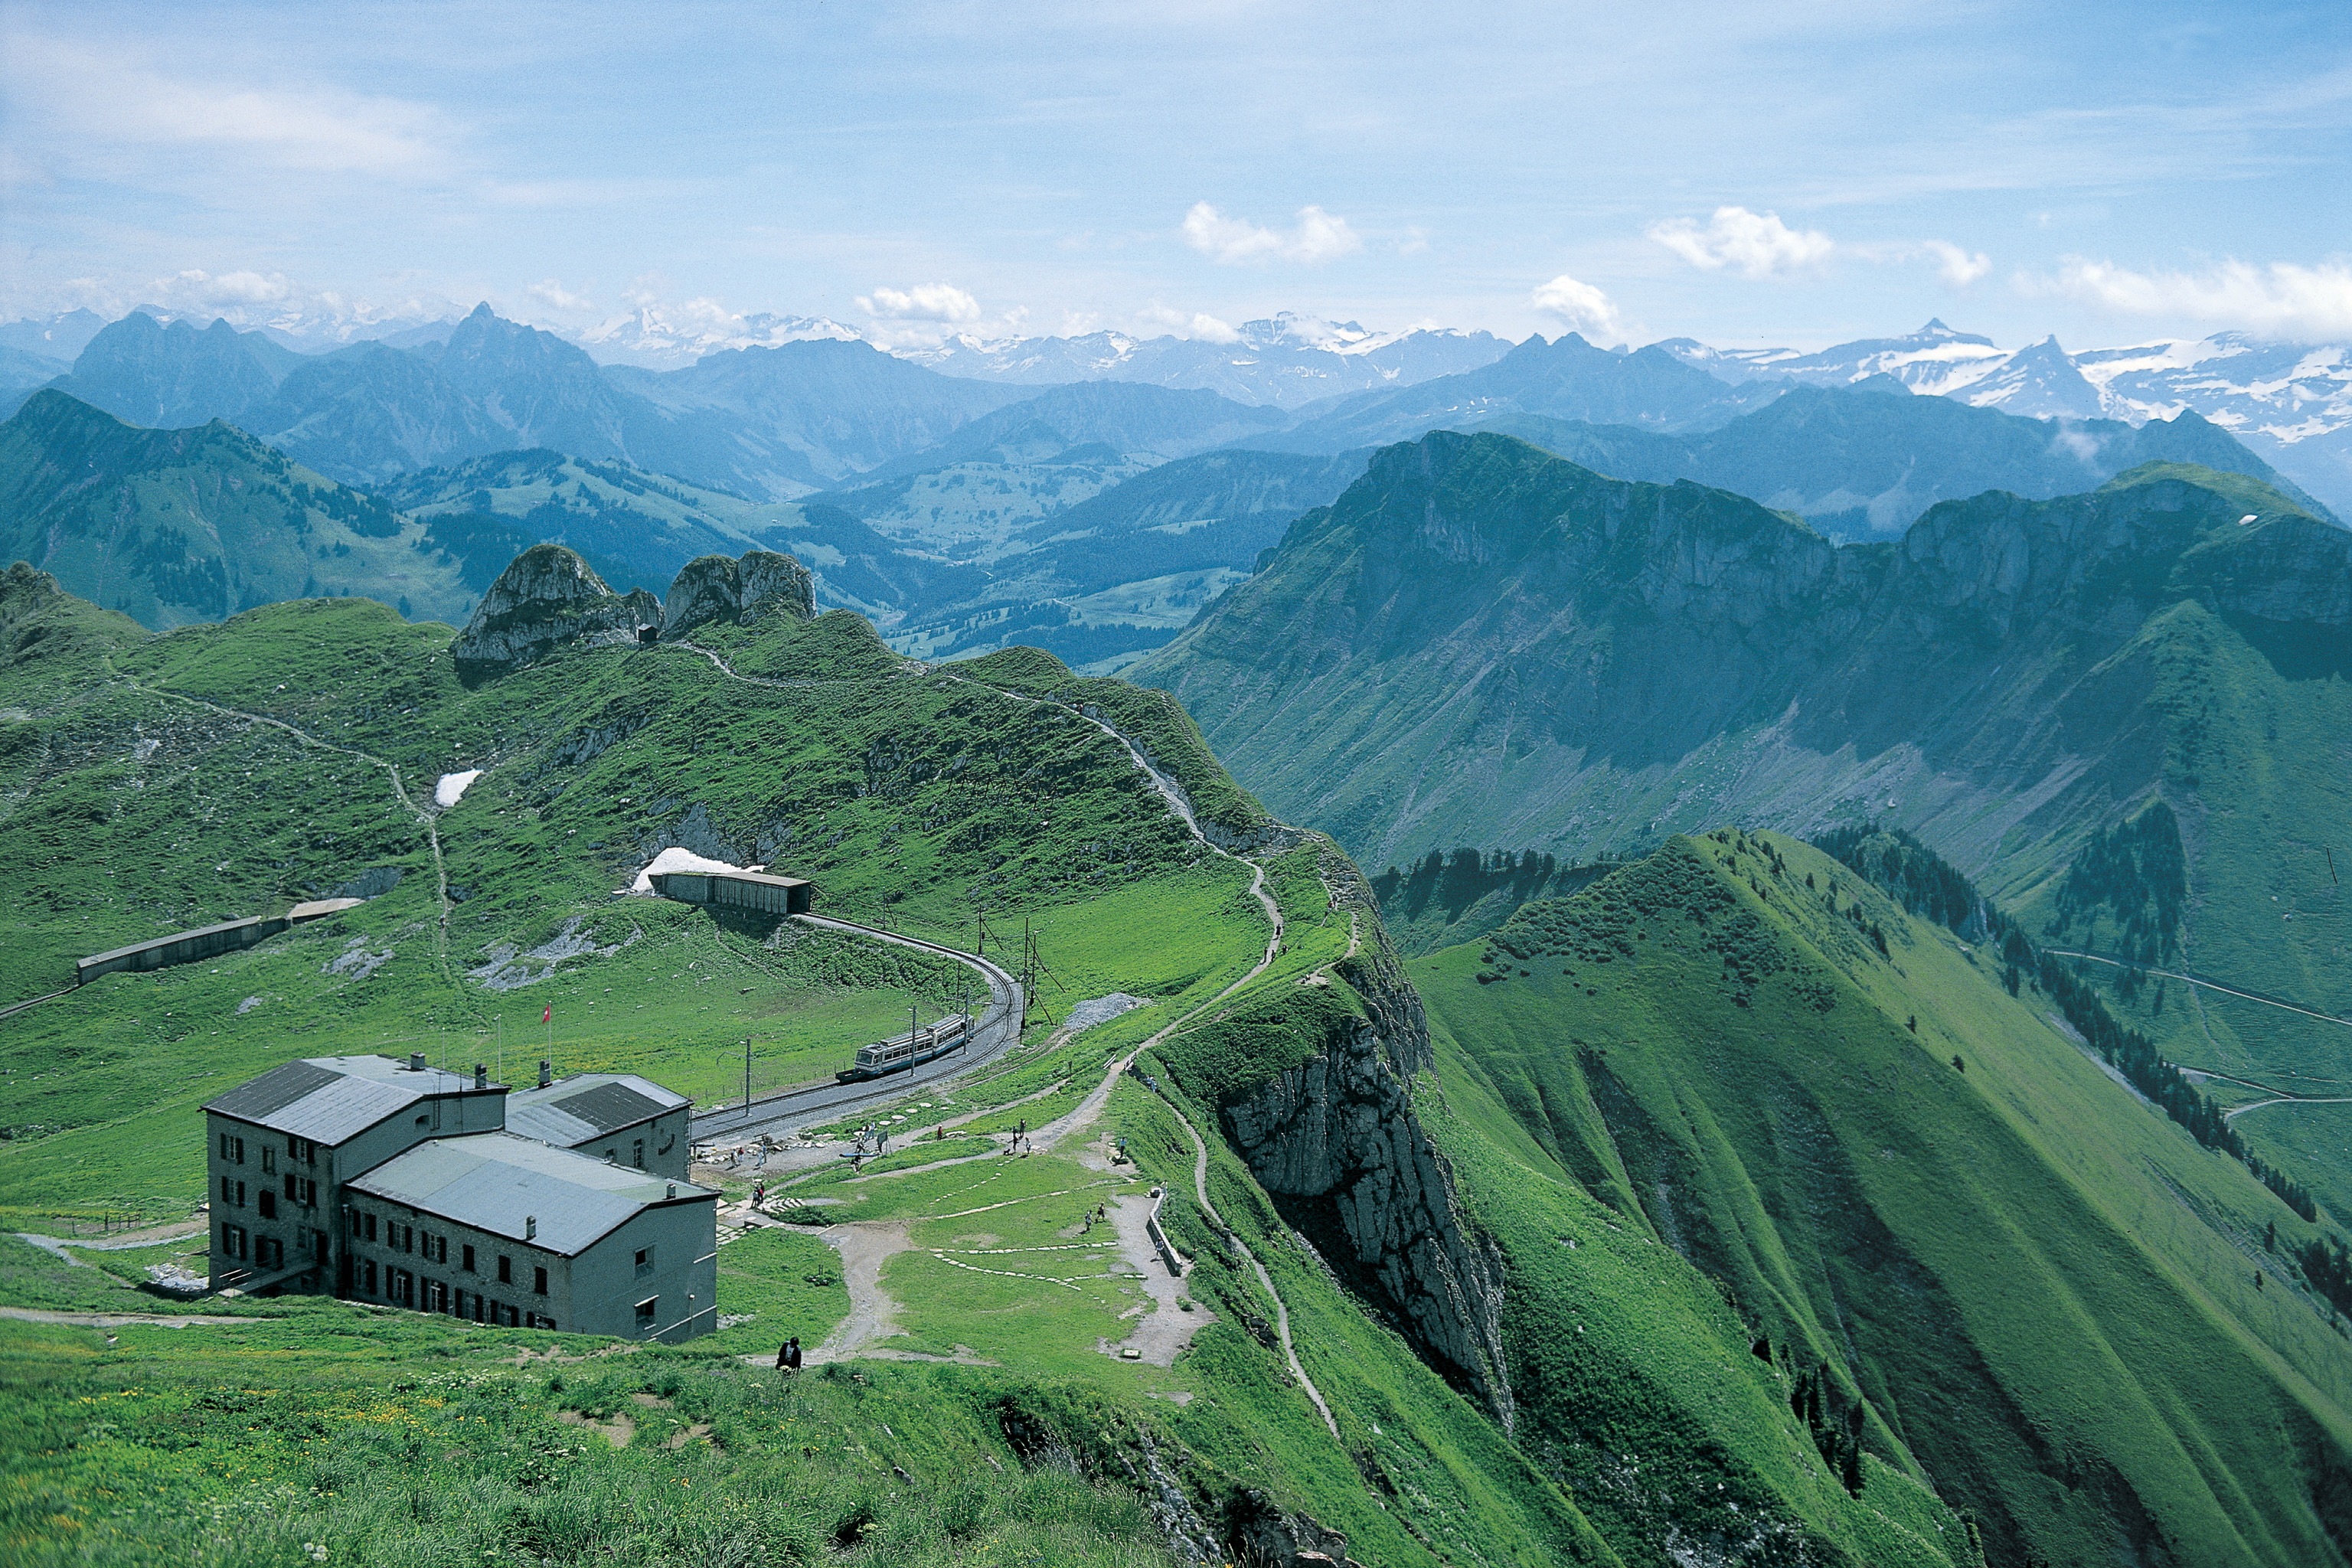 Rochers de Naye Rail Passes and Tickets for Switzerland.